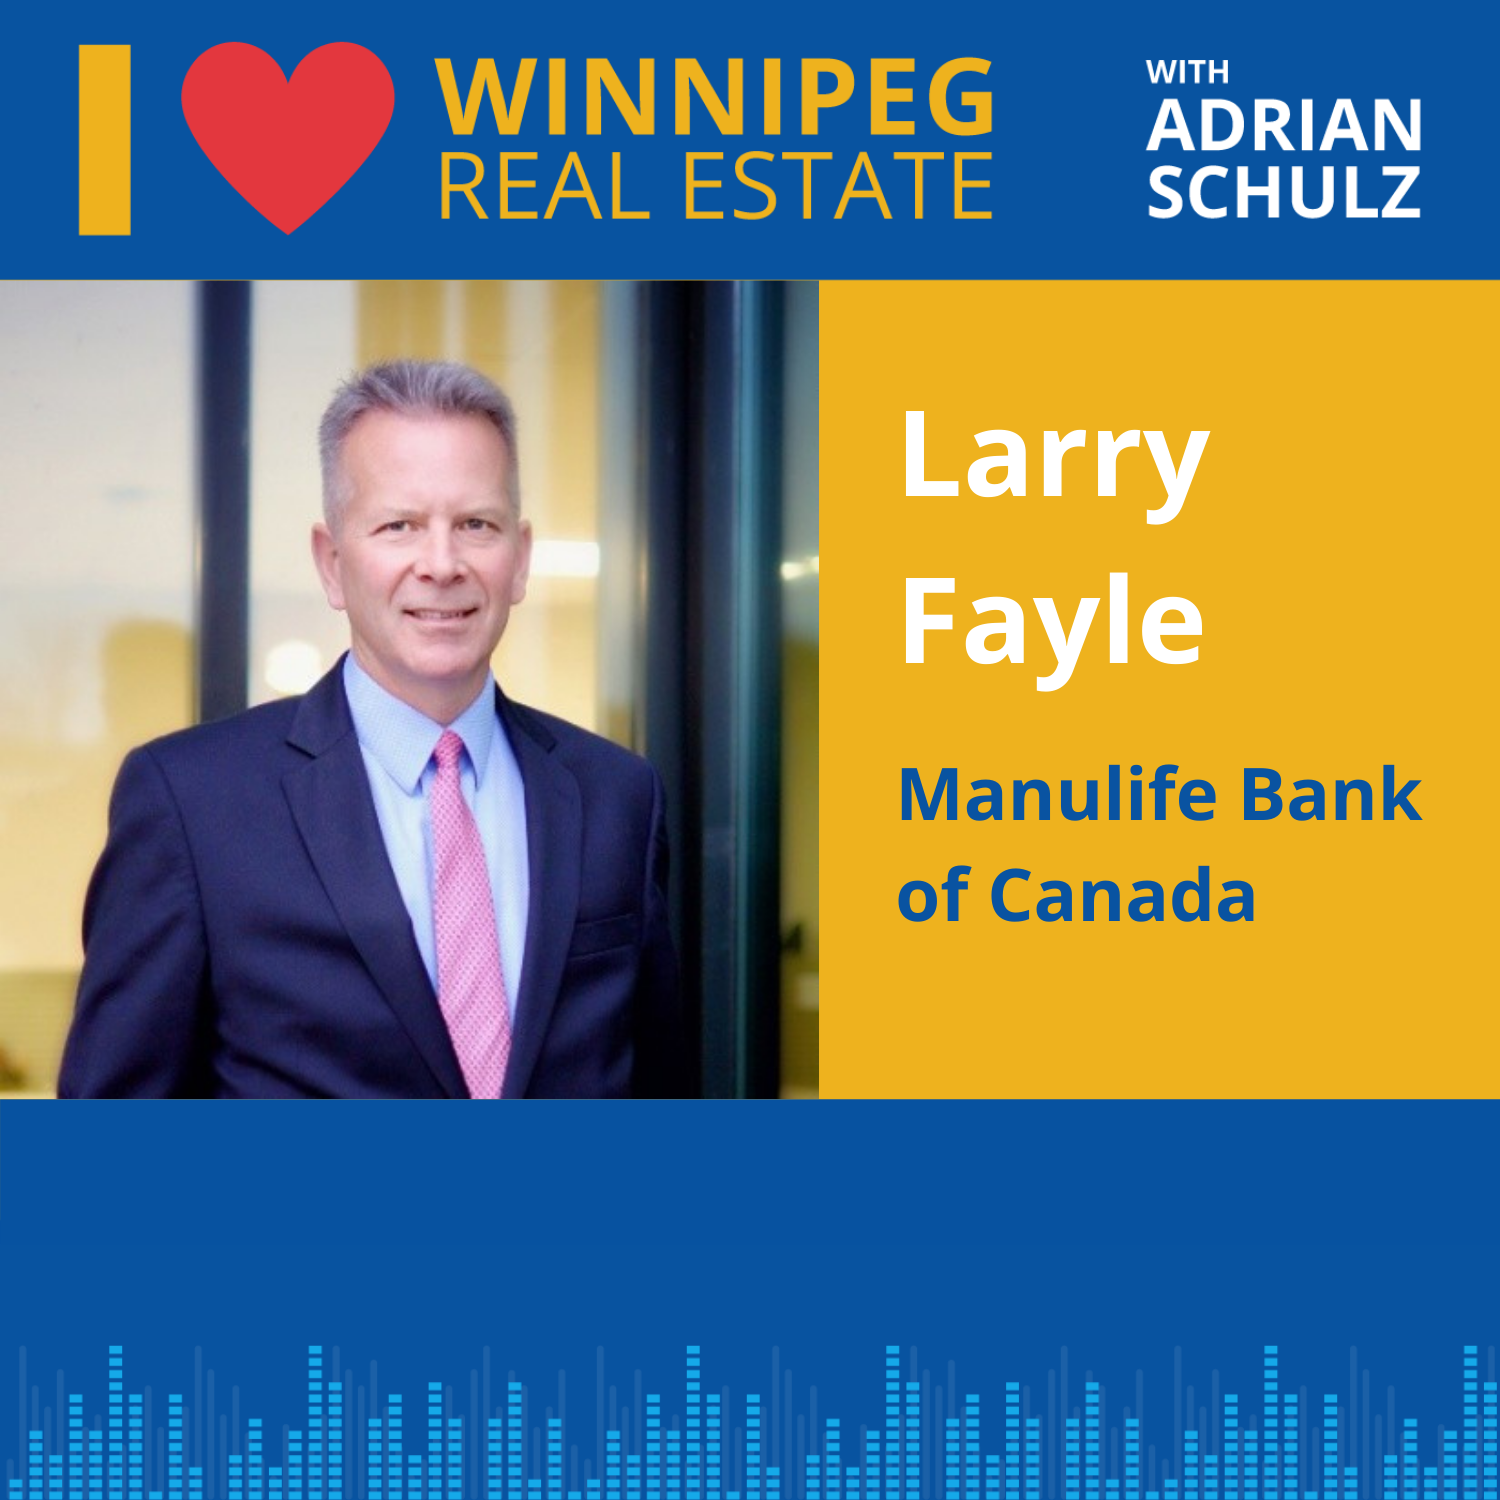 Larry Fayle on Manulife Bank of Canada Image